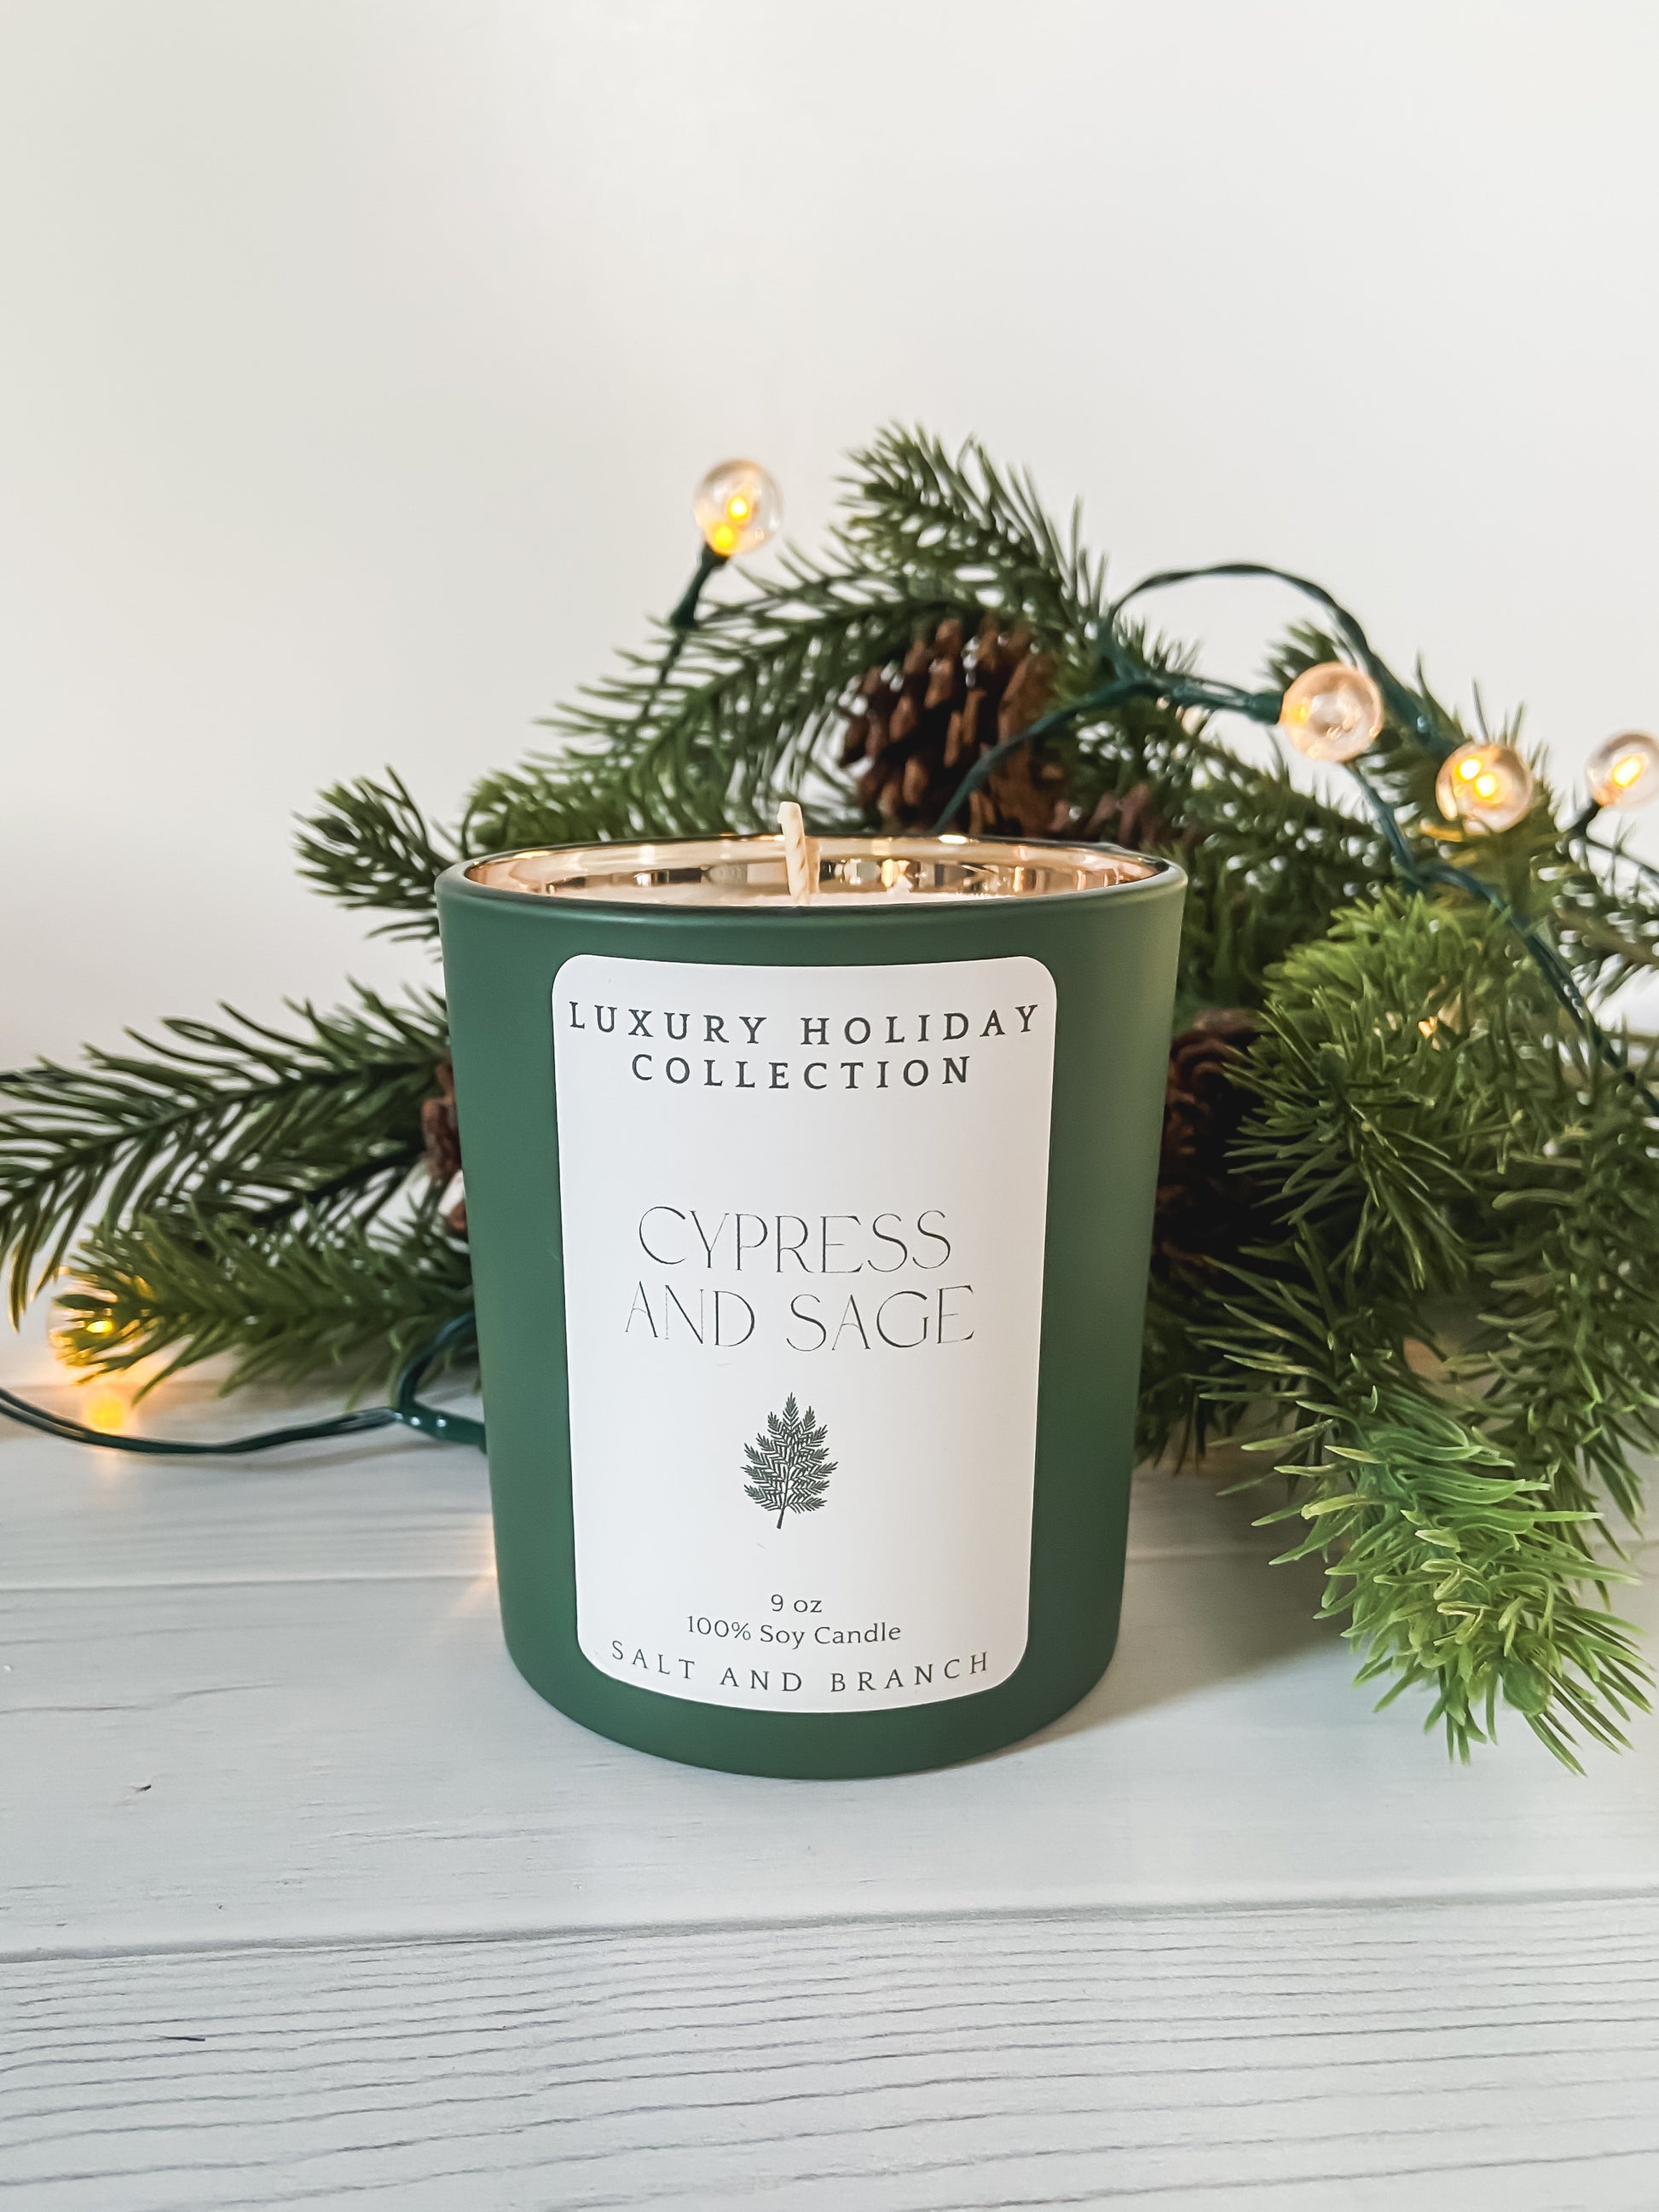 Cypress and Sage Soy Candle - Salt and Branch